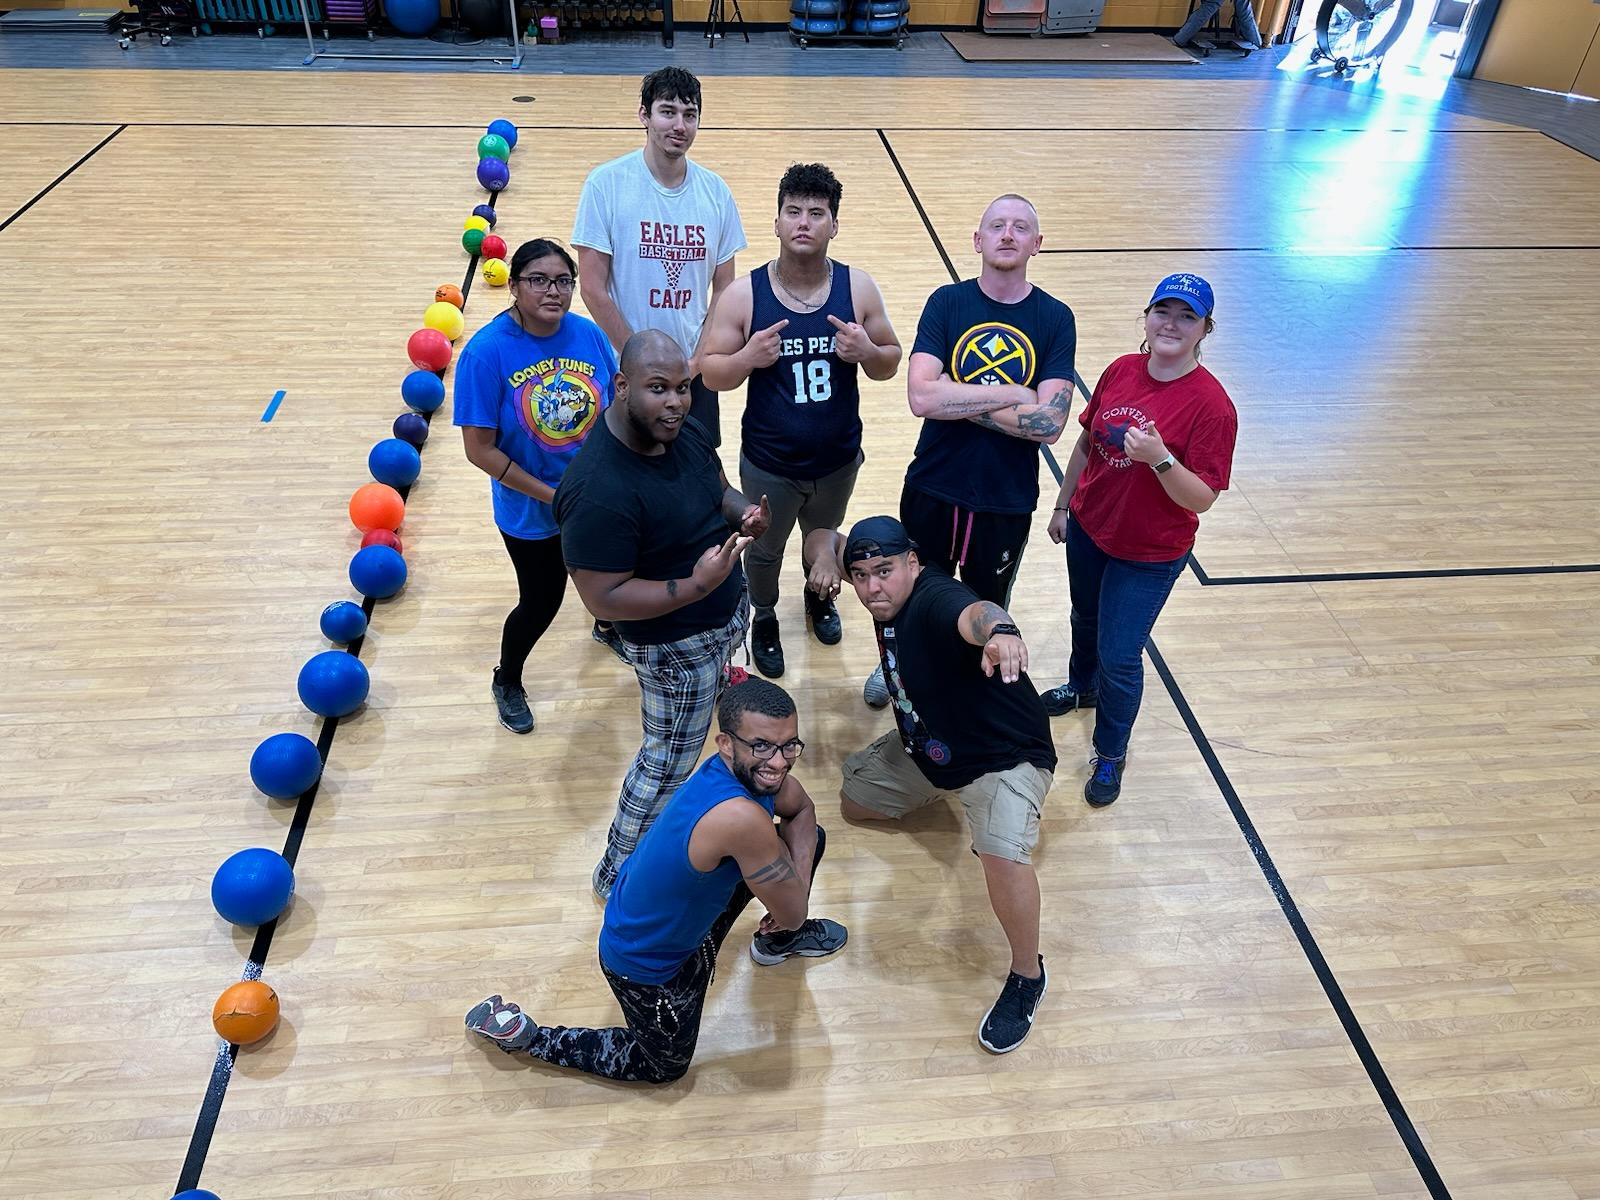 SVO members play dodgeball at one of their events